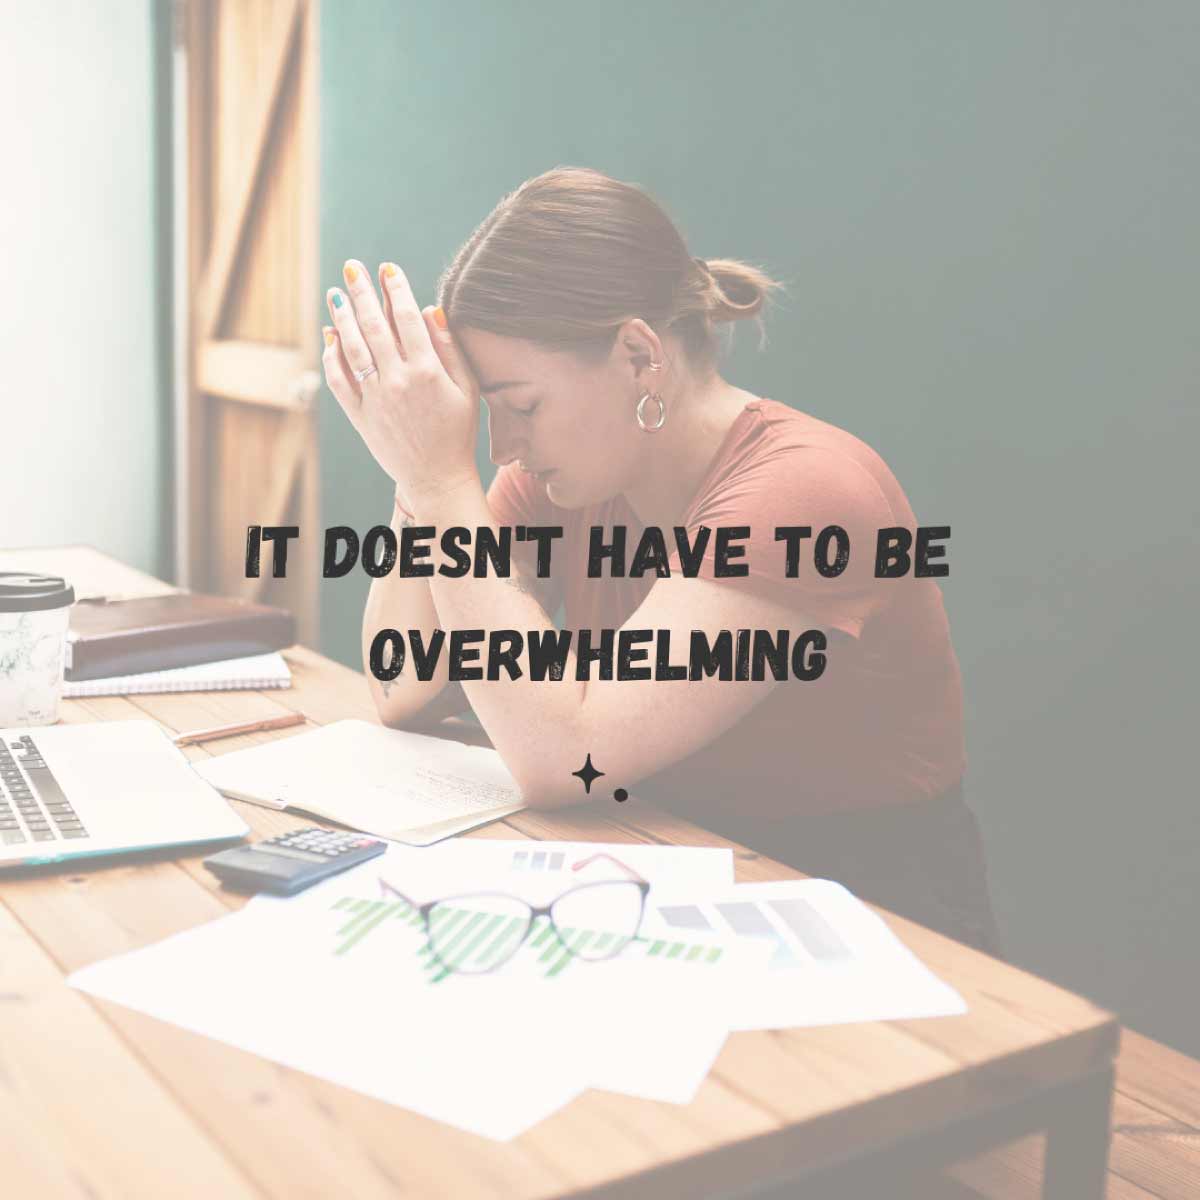 It doesn't have to be overwhelming. A woman with her hands up to her face in complete overwhelm while sitting at a desk in front of a computer.